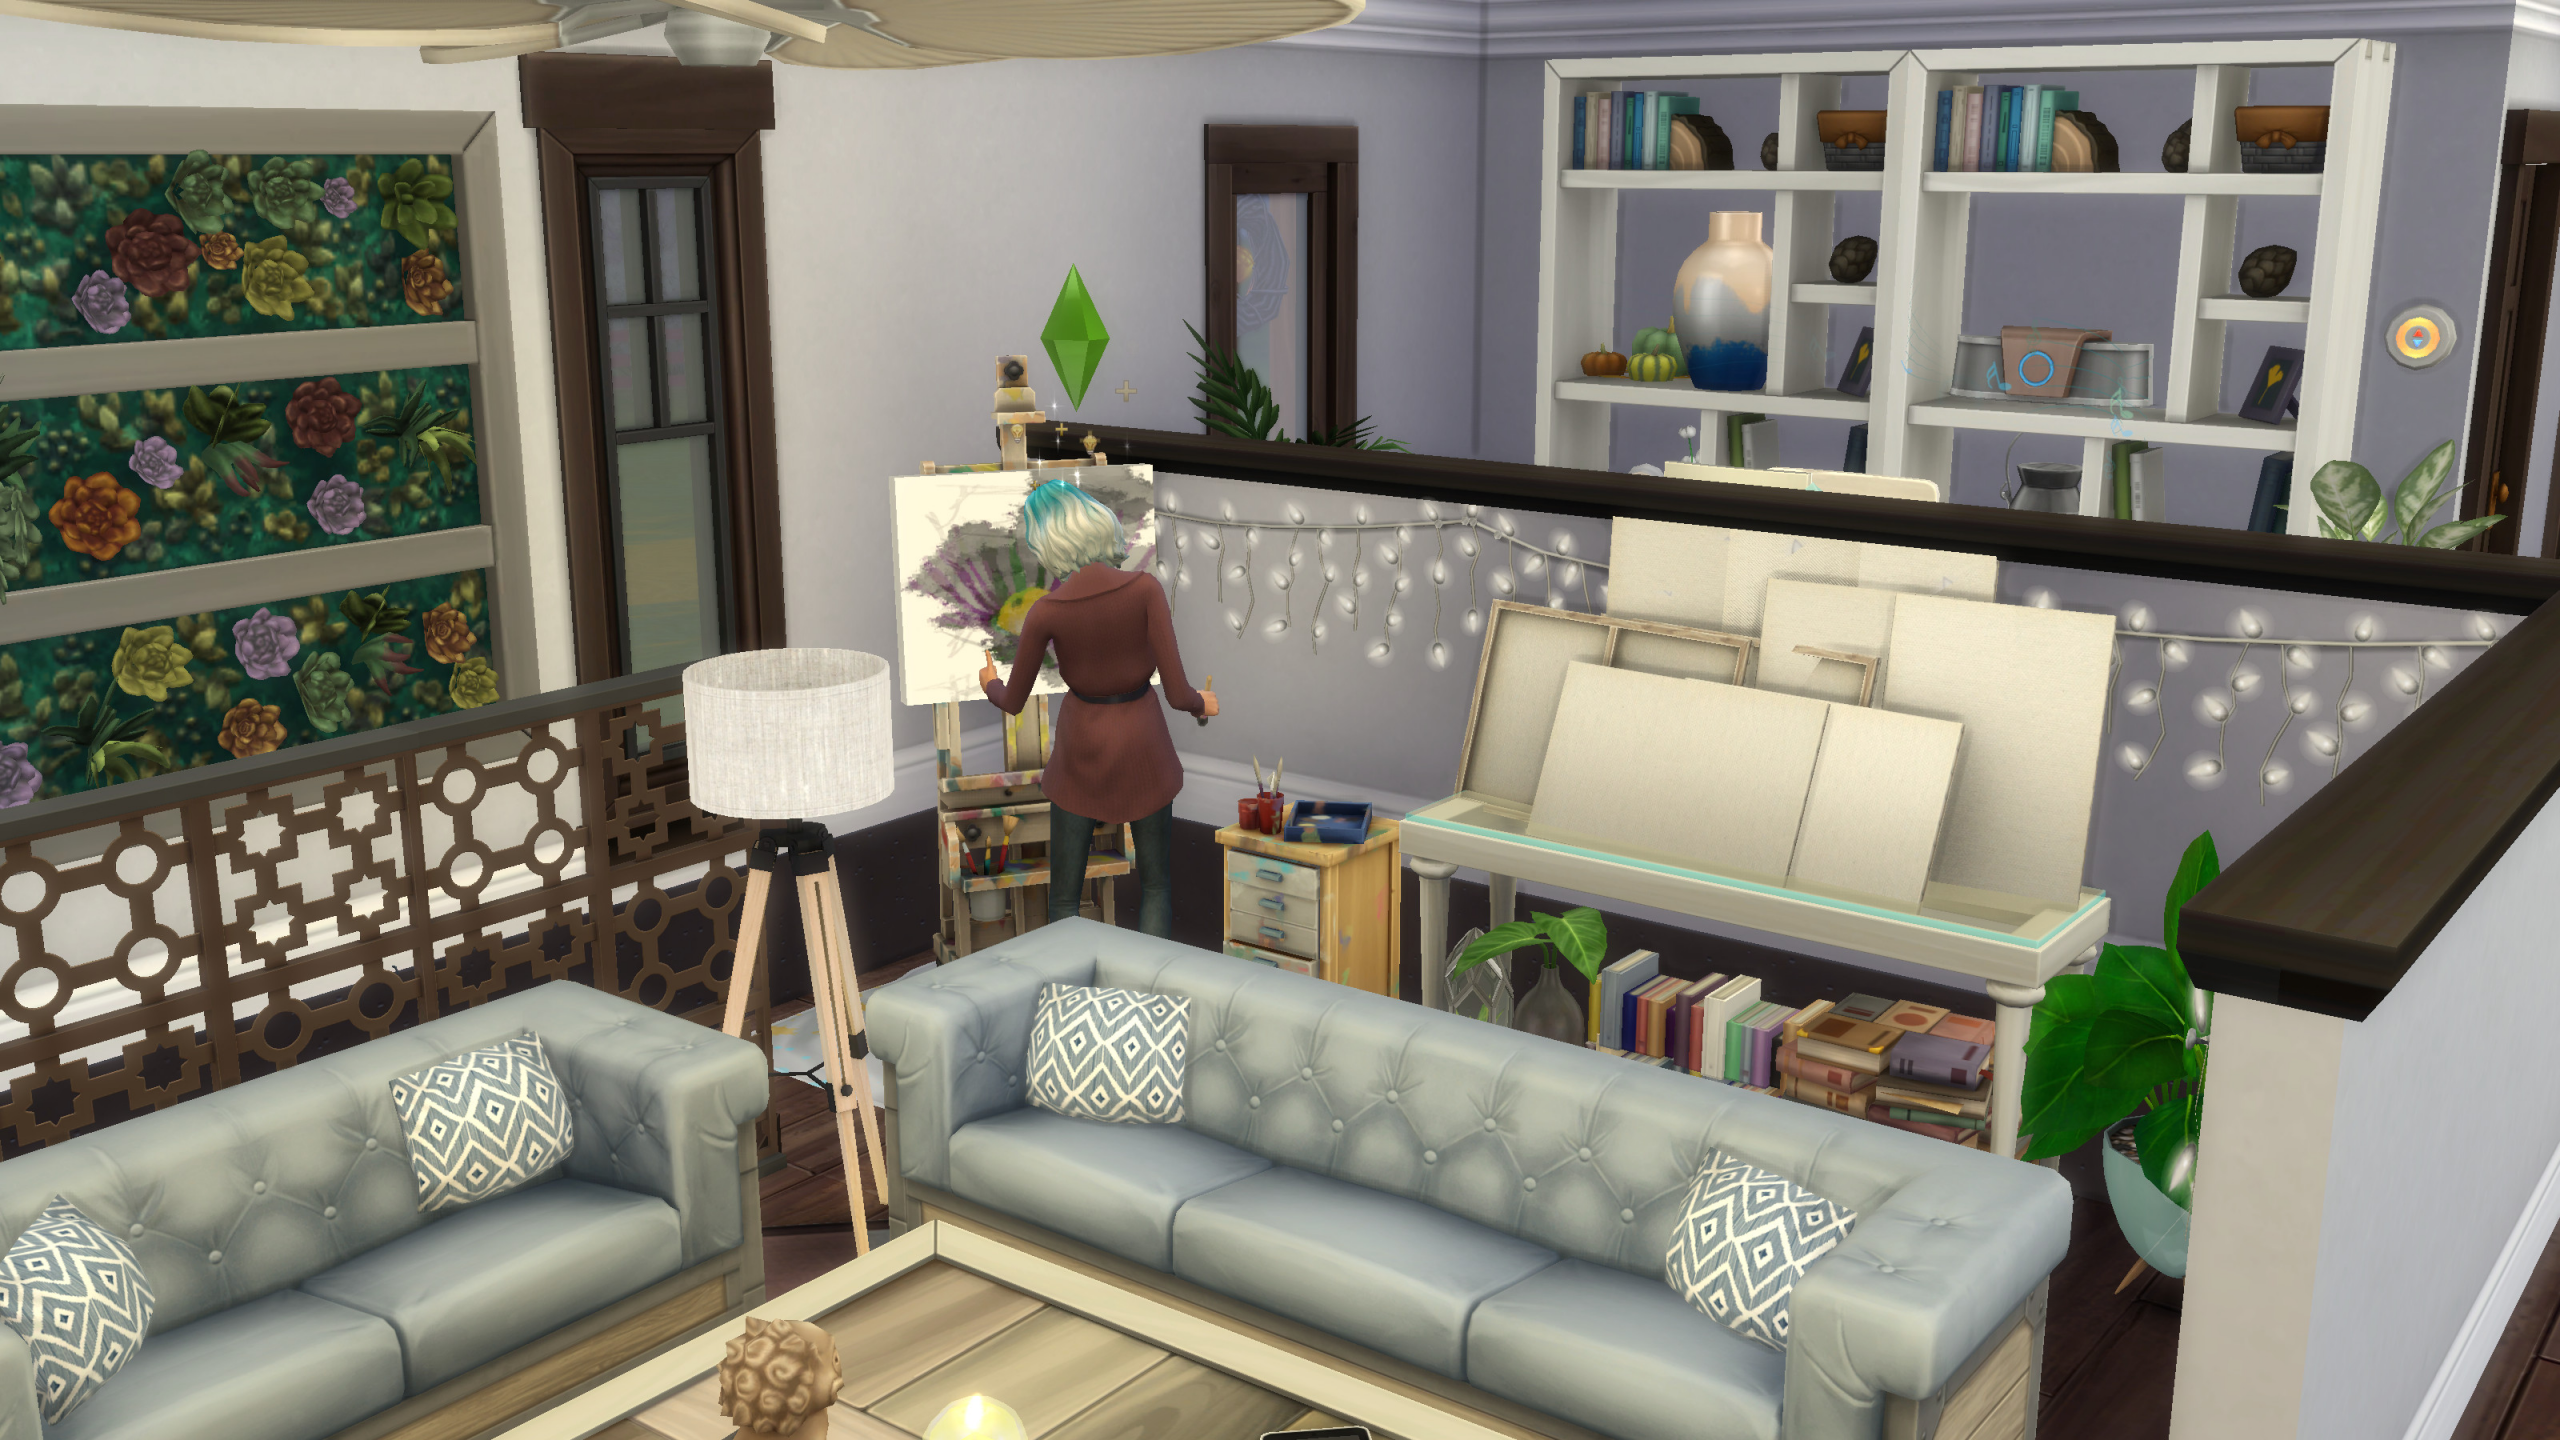 Sims 4 Living Room Ideas
 My sunken living room gives me all the feels thesims